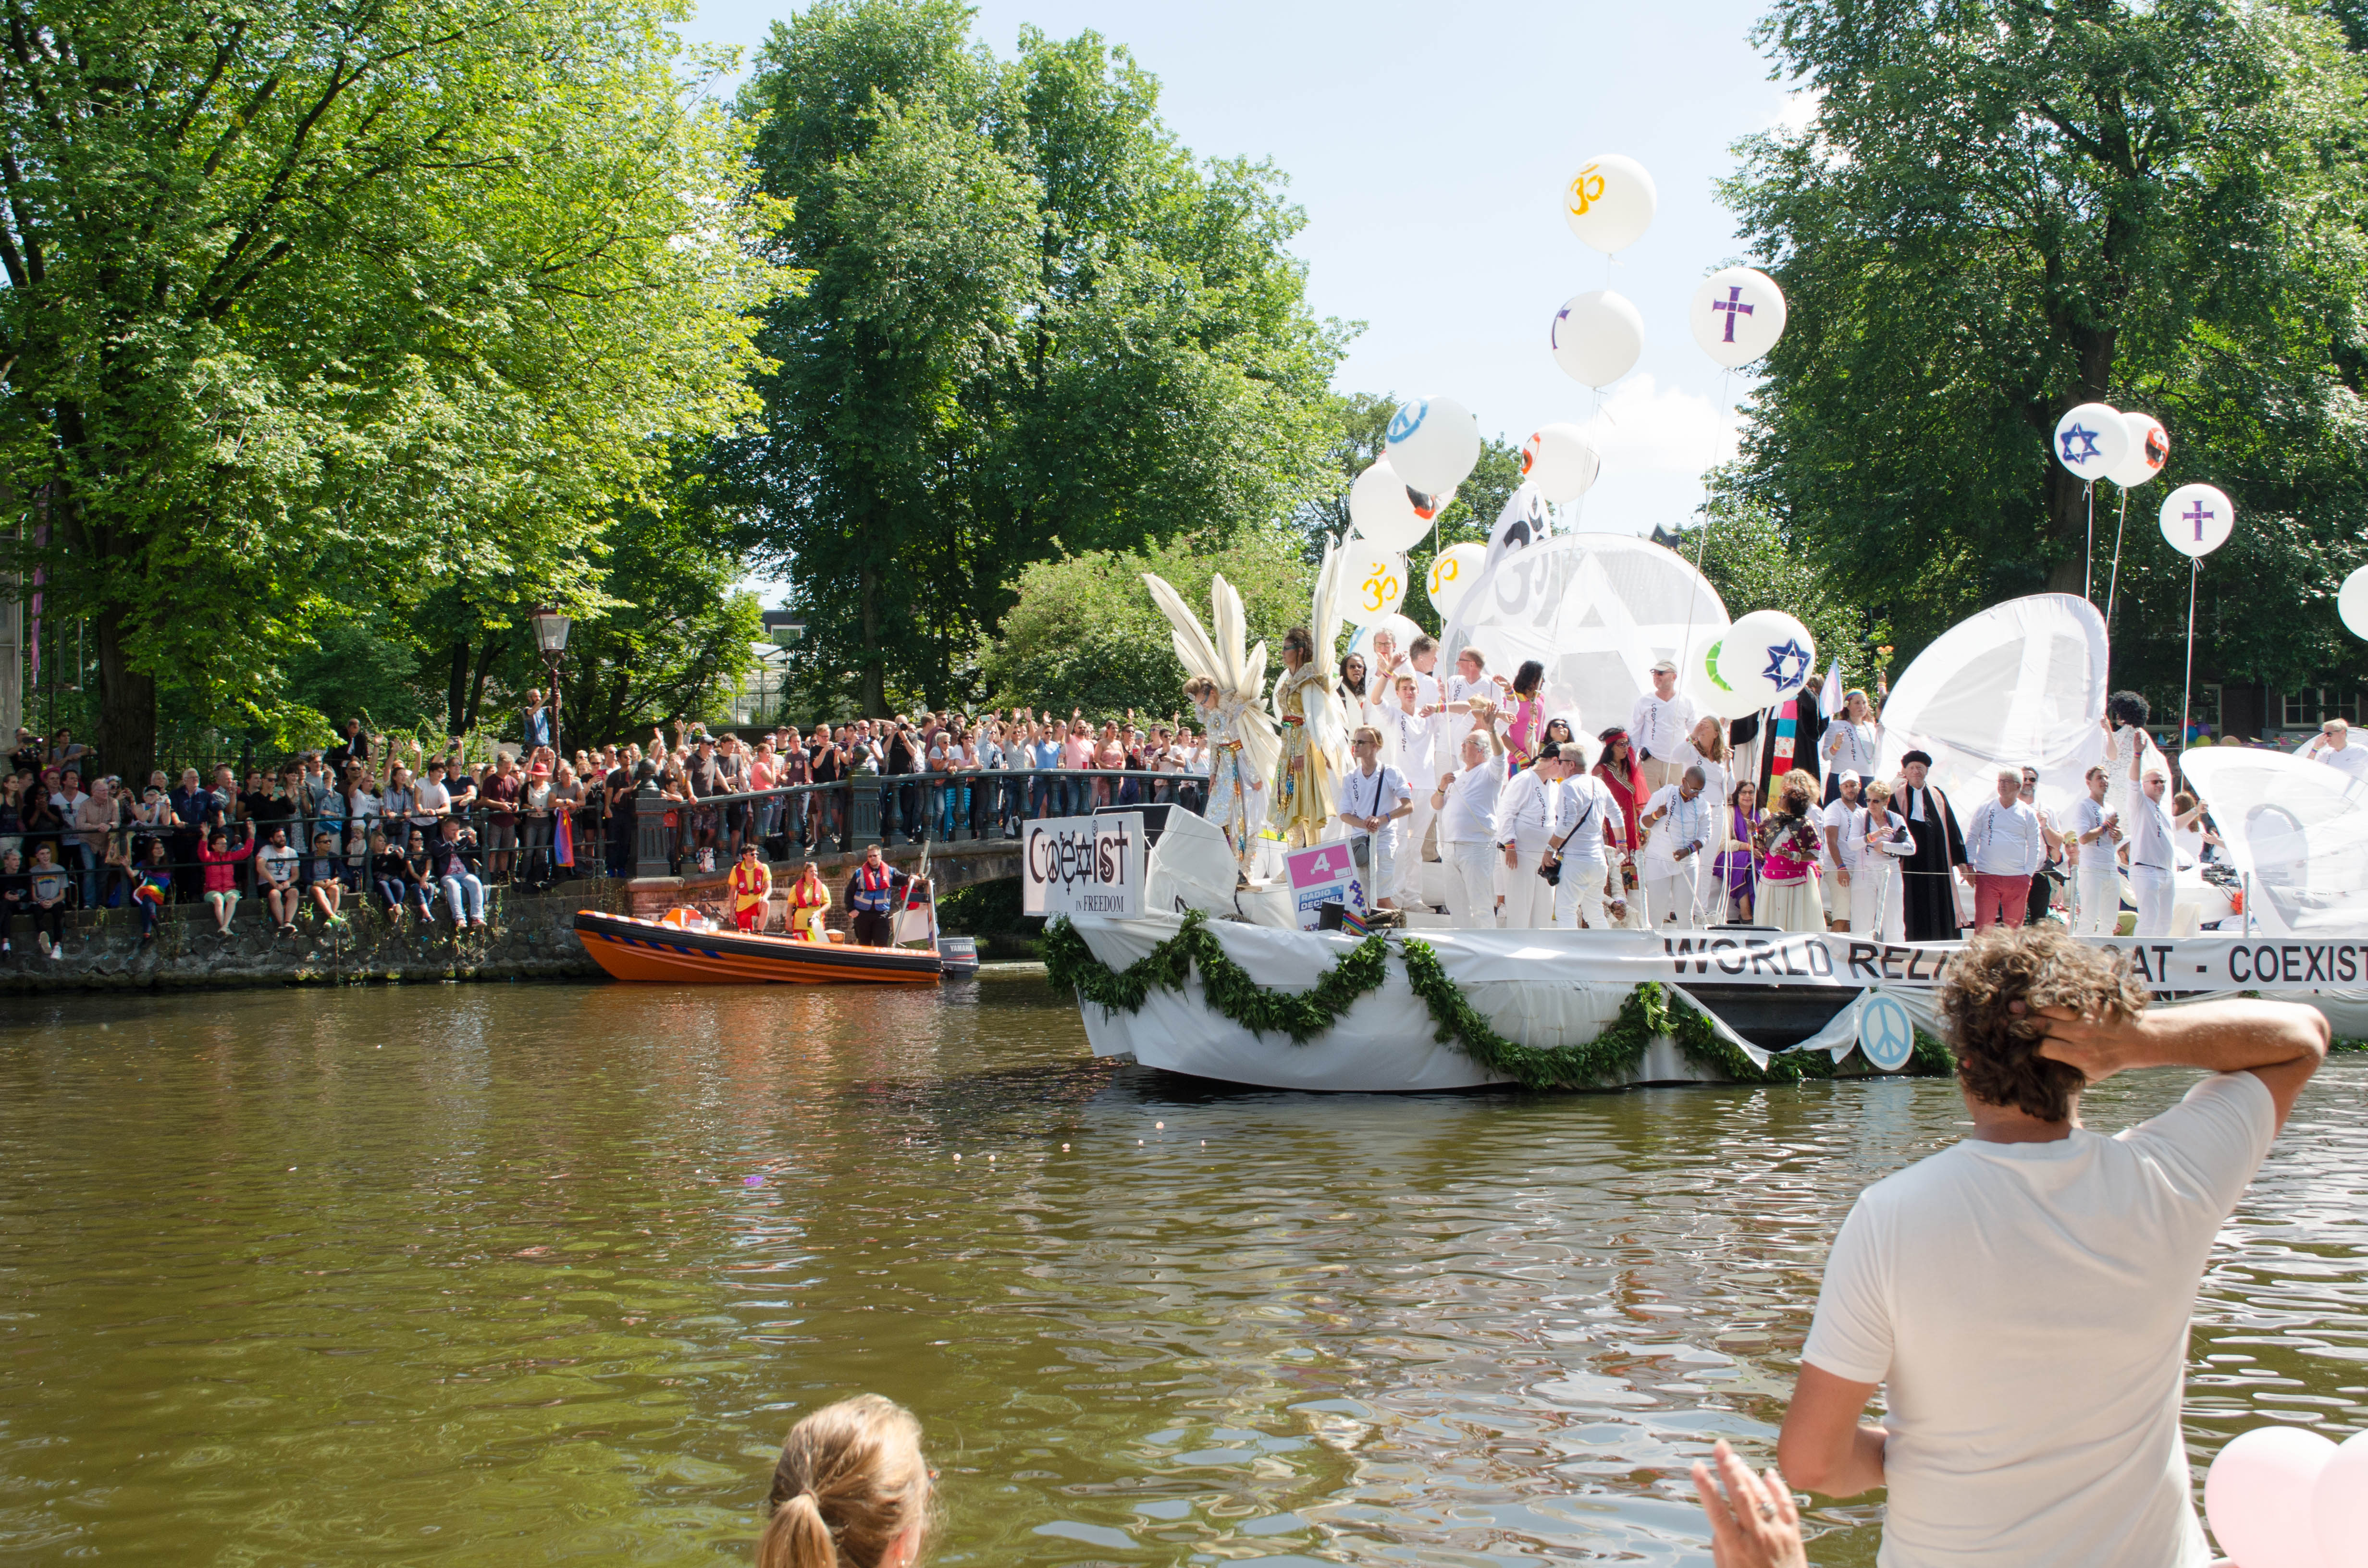 The Coexist boat during the 2016 Pride Parade in Amsterdam